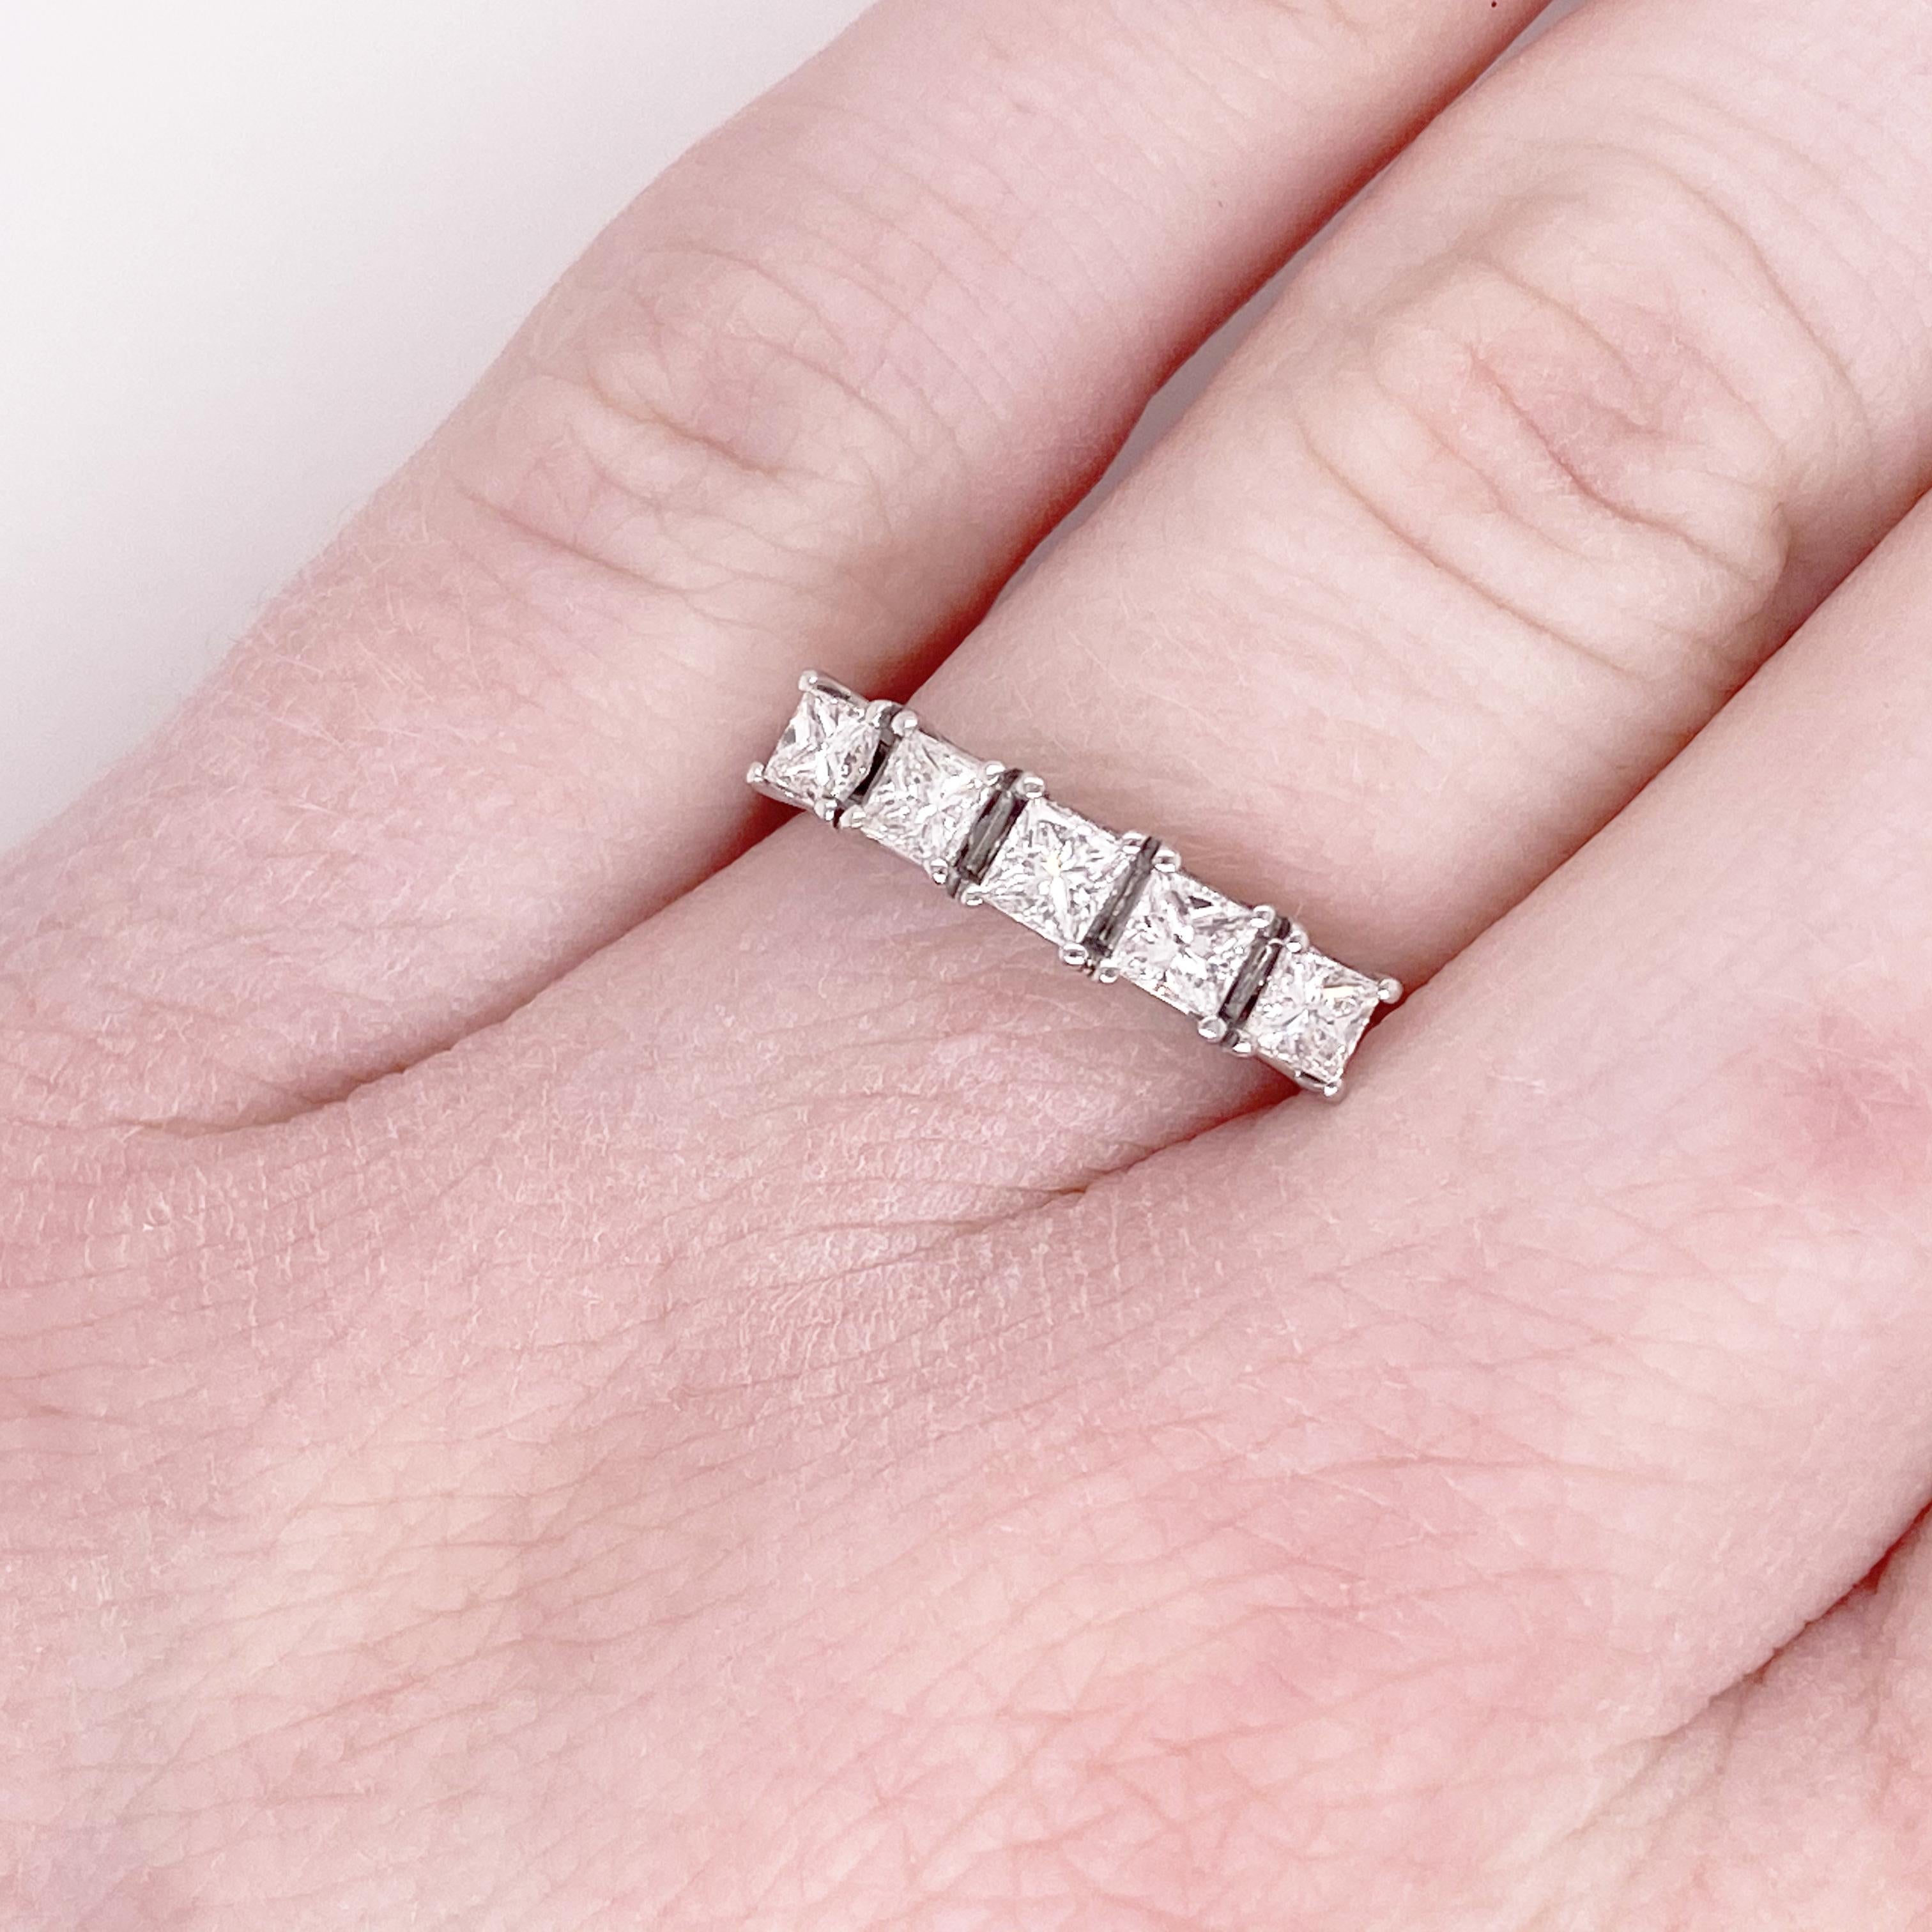 This stunning princess cut 14k white gold band dripping with diamonds is sure to take your breath away! This ring provides a look that is very modern yet classic. This ring is very fashionable and can add a touch of style to any outfit, yet it is